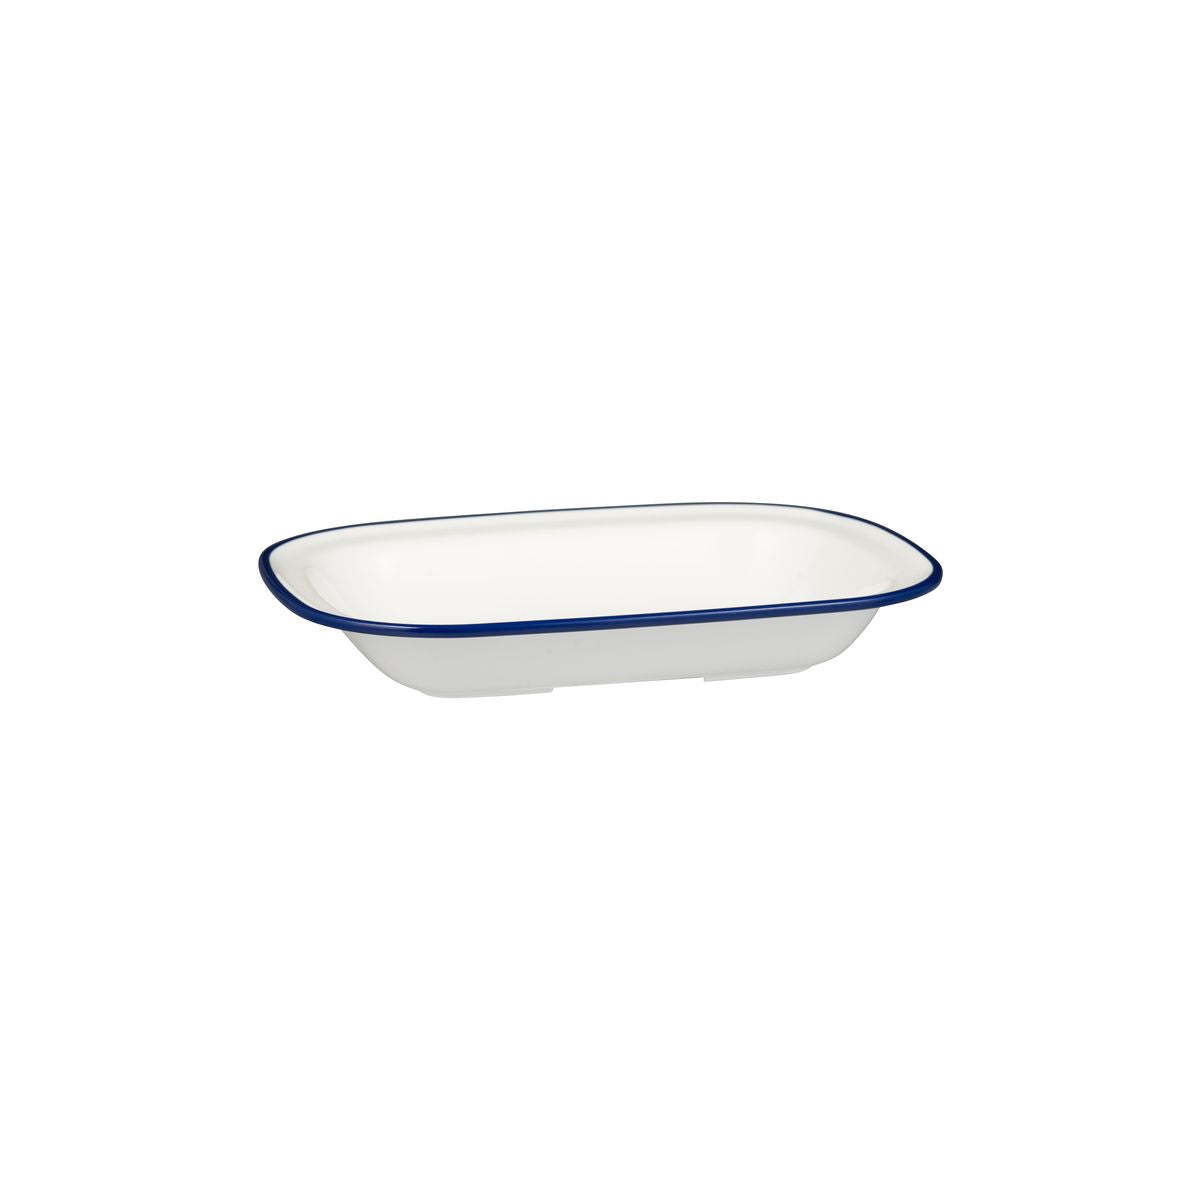 Rectangular Dish, 230 x 176 x 45mm, Melamine - White & Blue from Ryner Melamine. Sold in boxes of 12. Hospitality quality at wholesale price with The Flying Fork! 